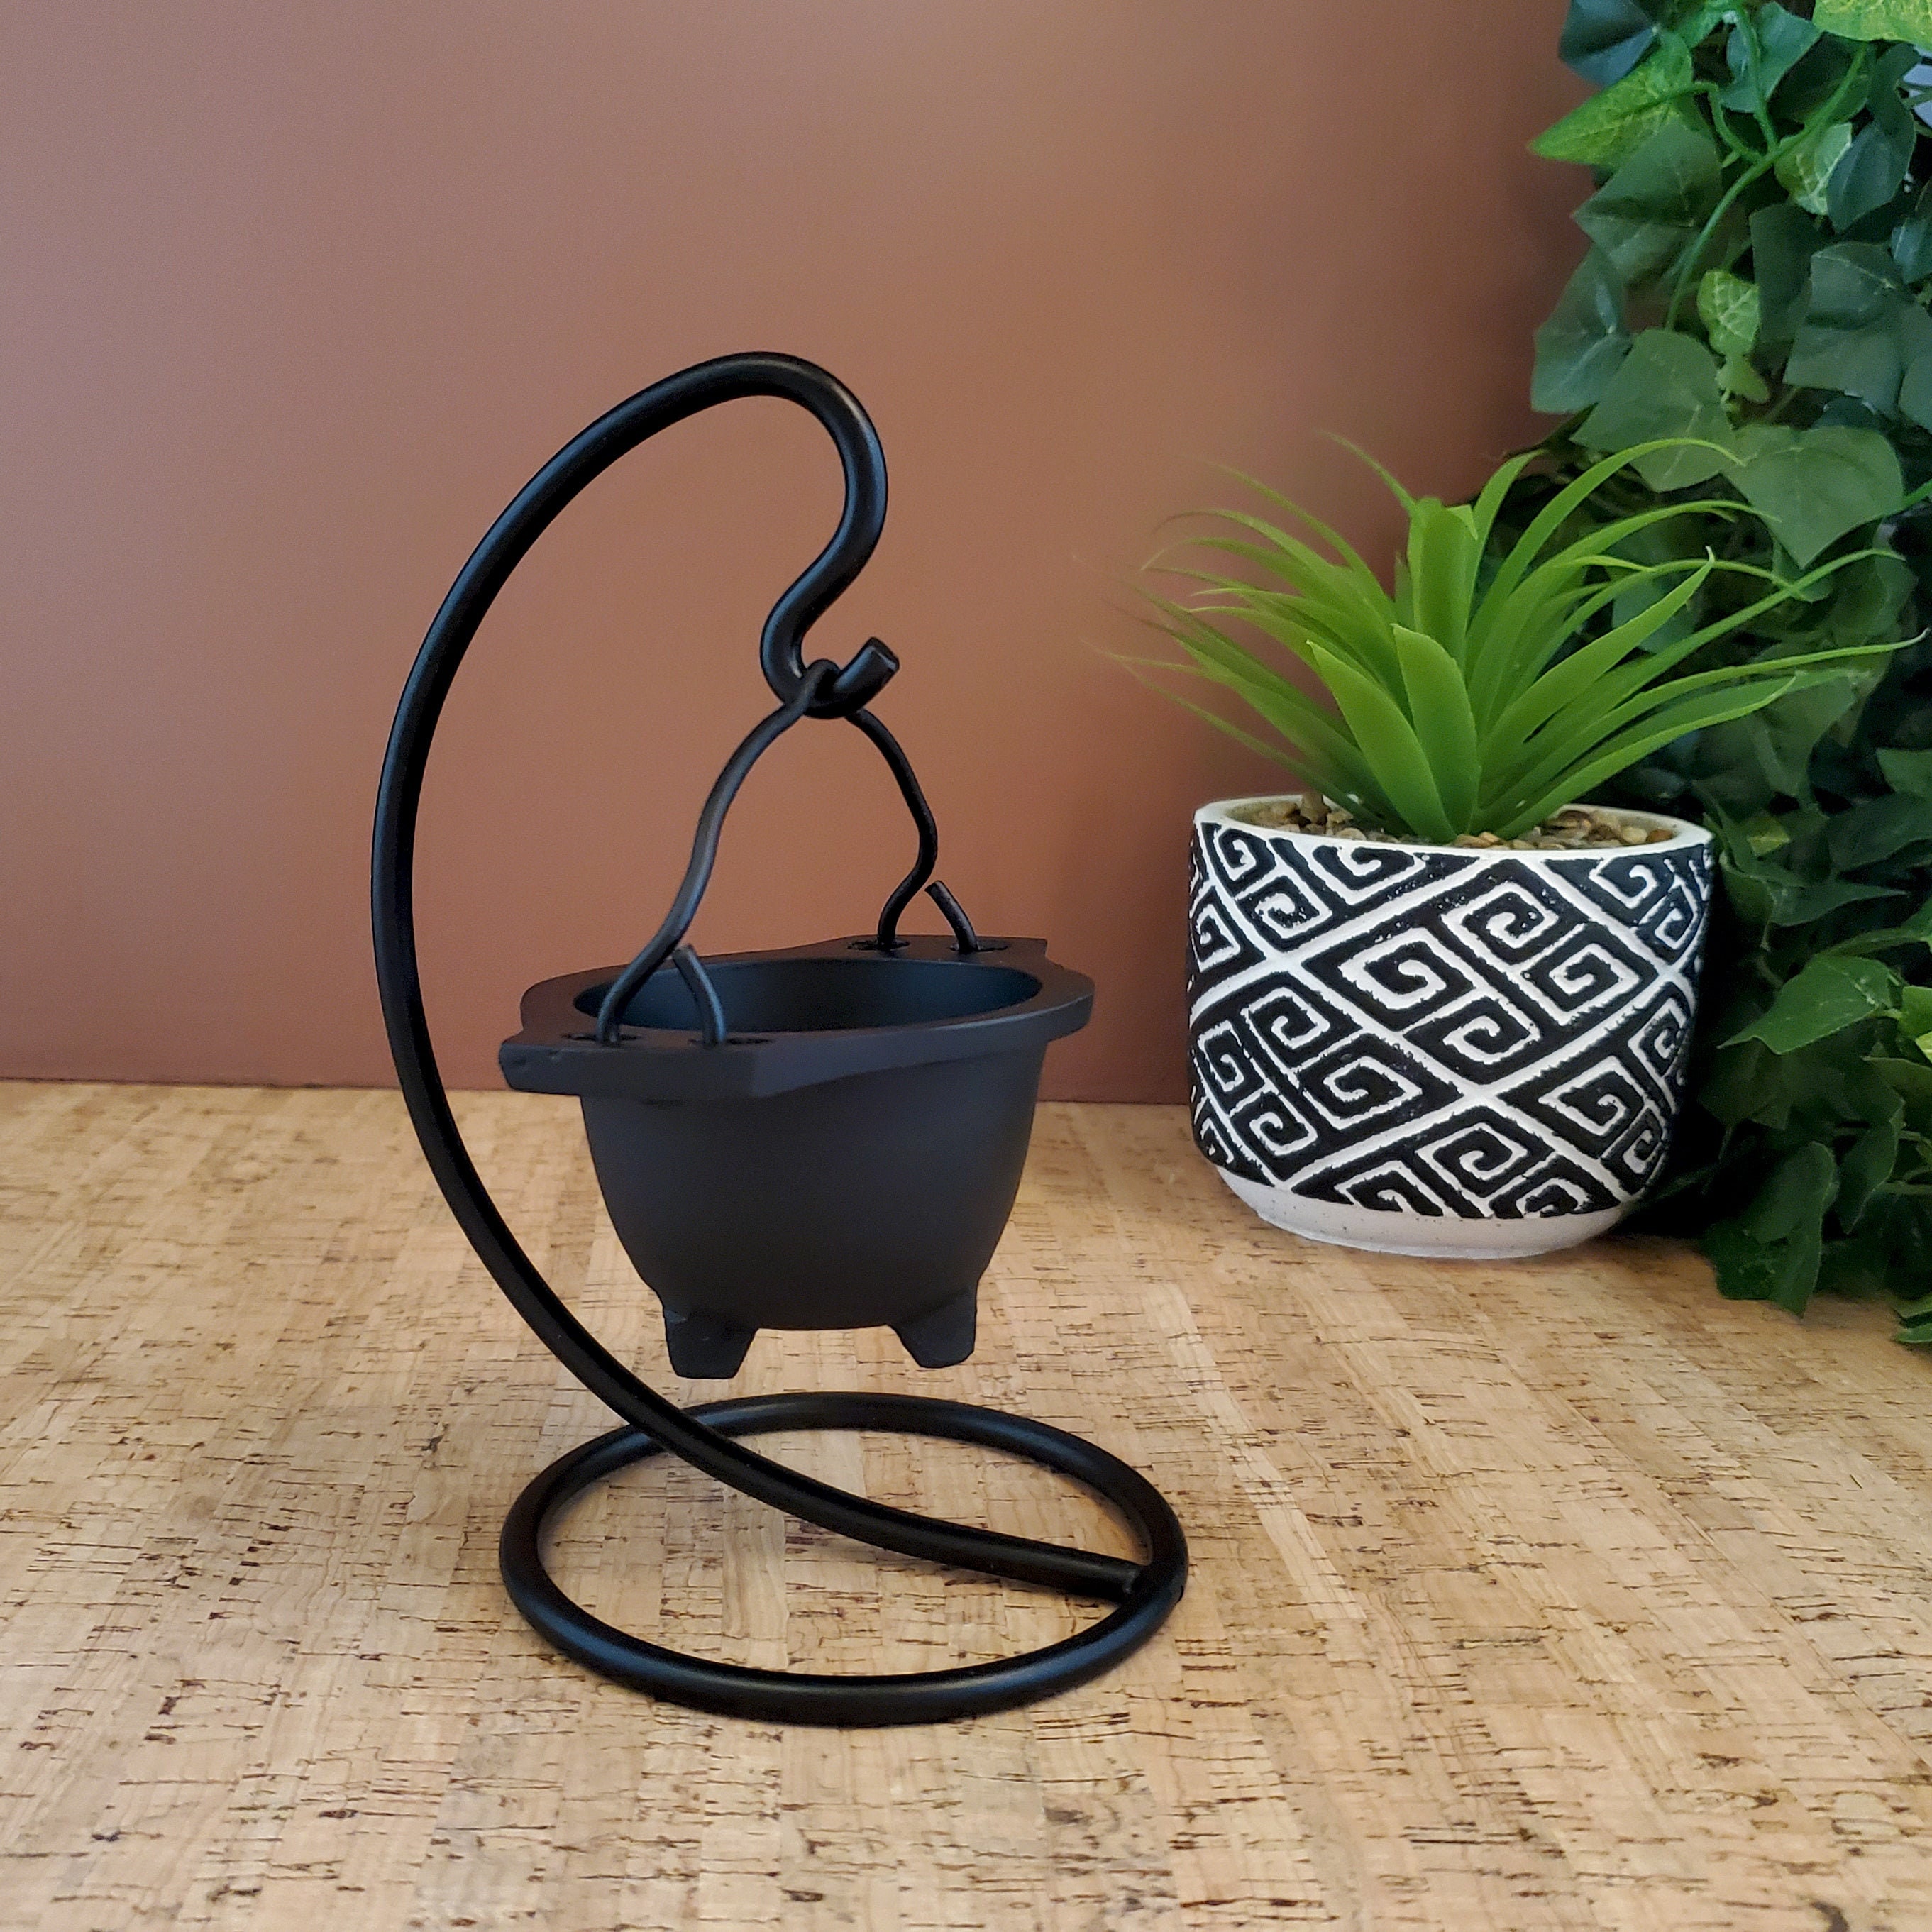 cast iron skillet wax warmer and